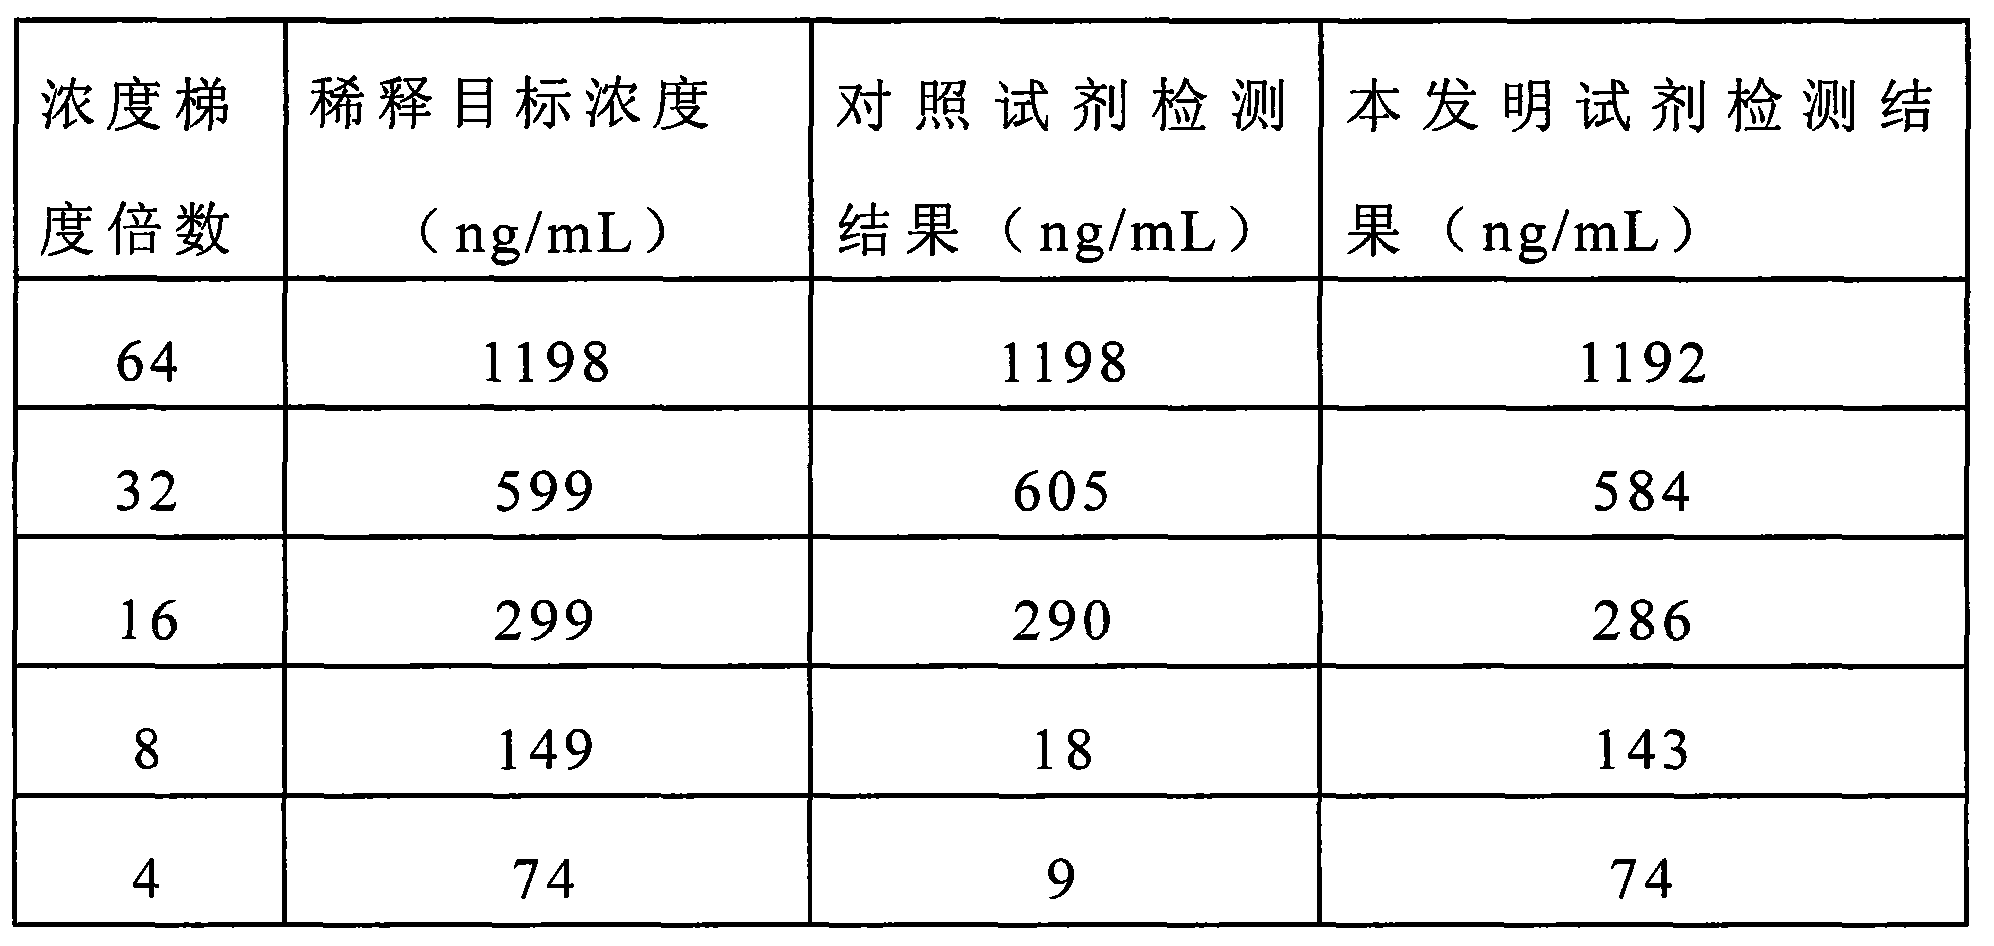 Detection reagent for heart-type fatty acid binding protein and preparation method of detection reagent for heart-type fatty acid binding protein